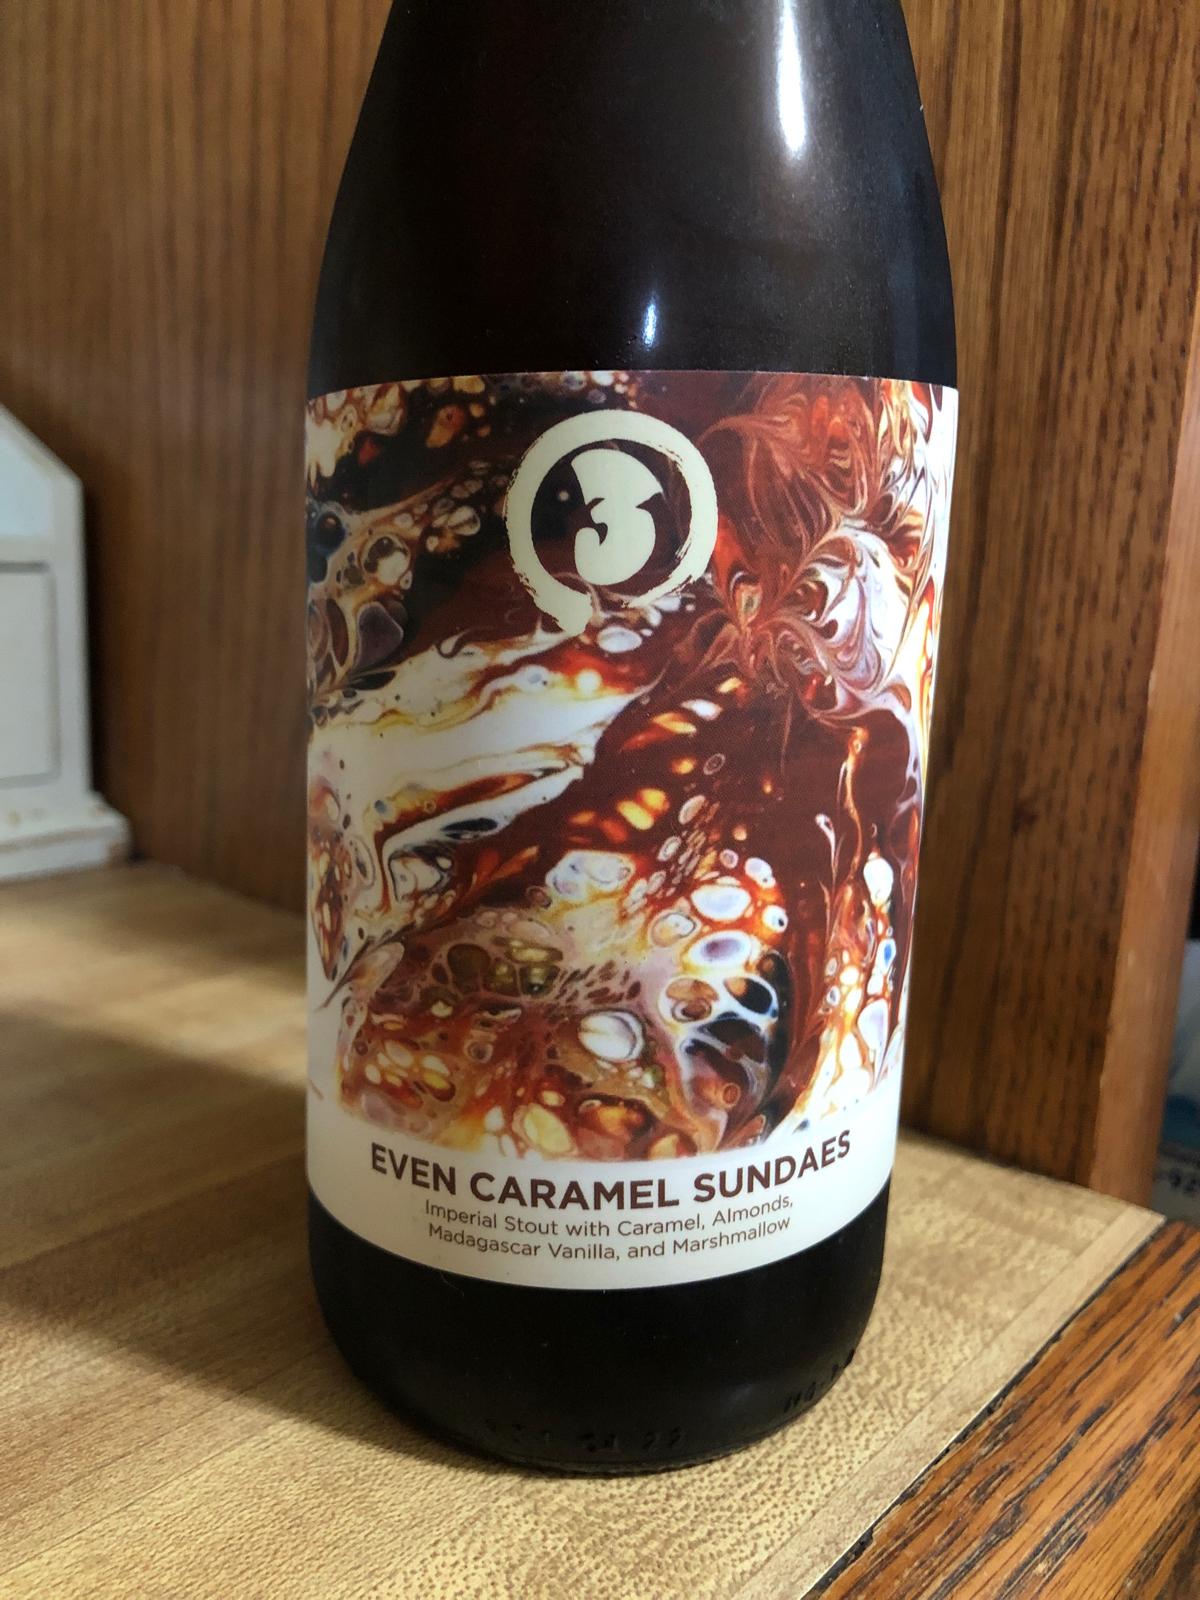 Even Caramel Sundaes (Collaboration with 3 Sons Brewing Co.)